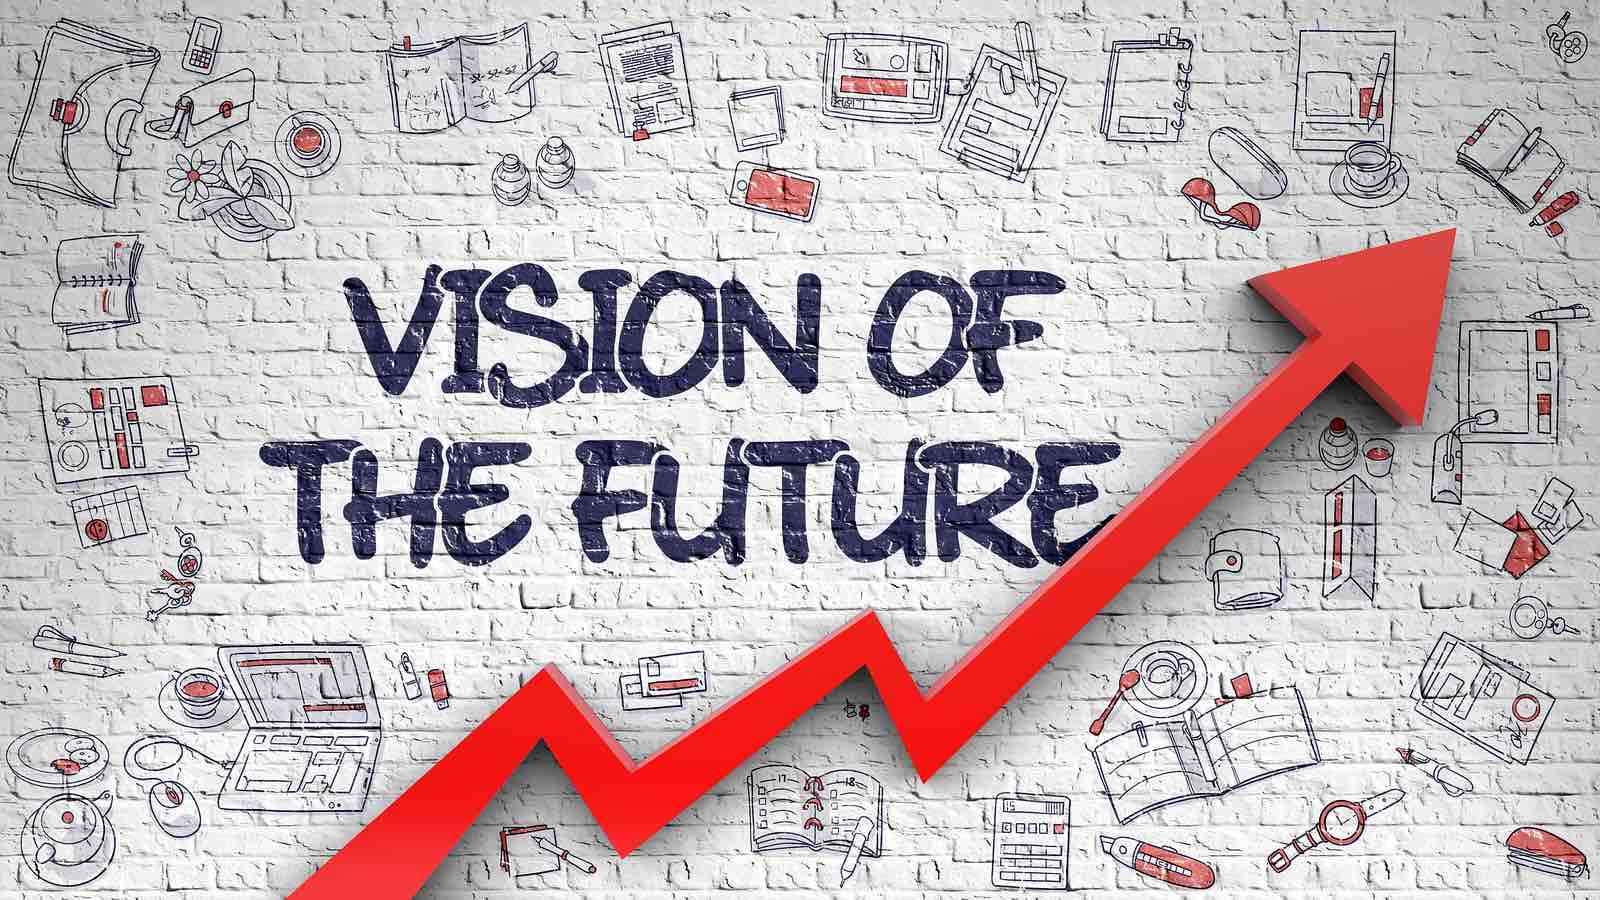 Vision: A Necessity for Business Decision-Making